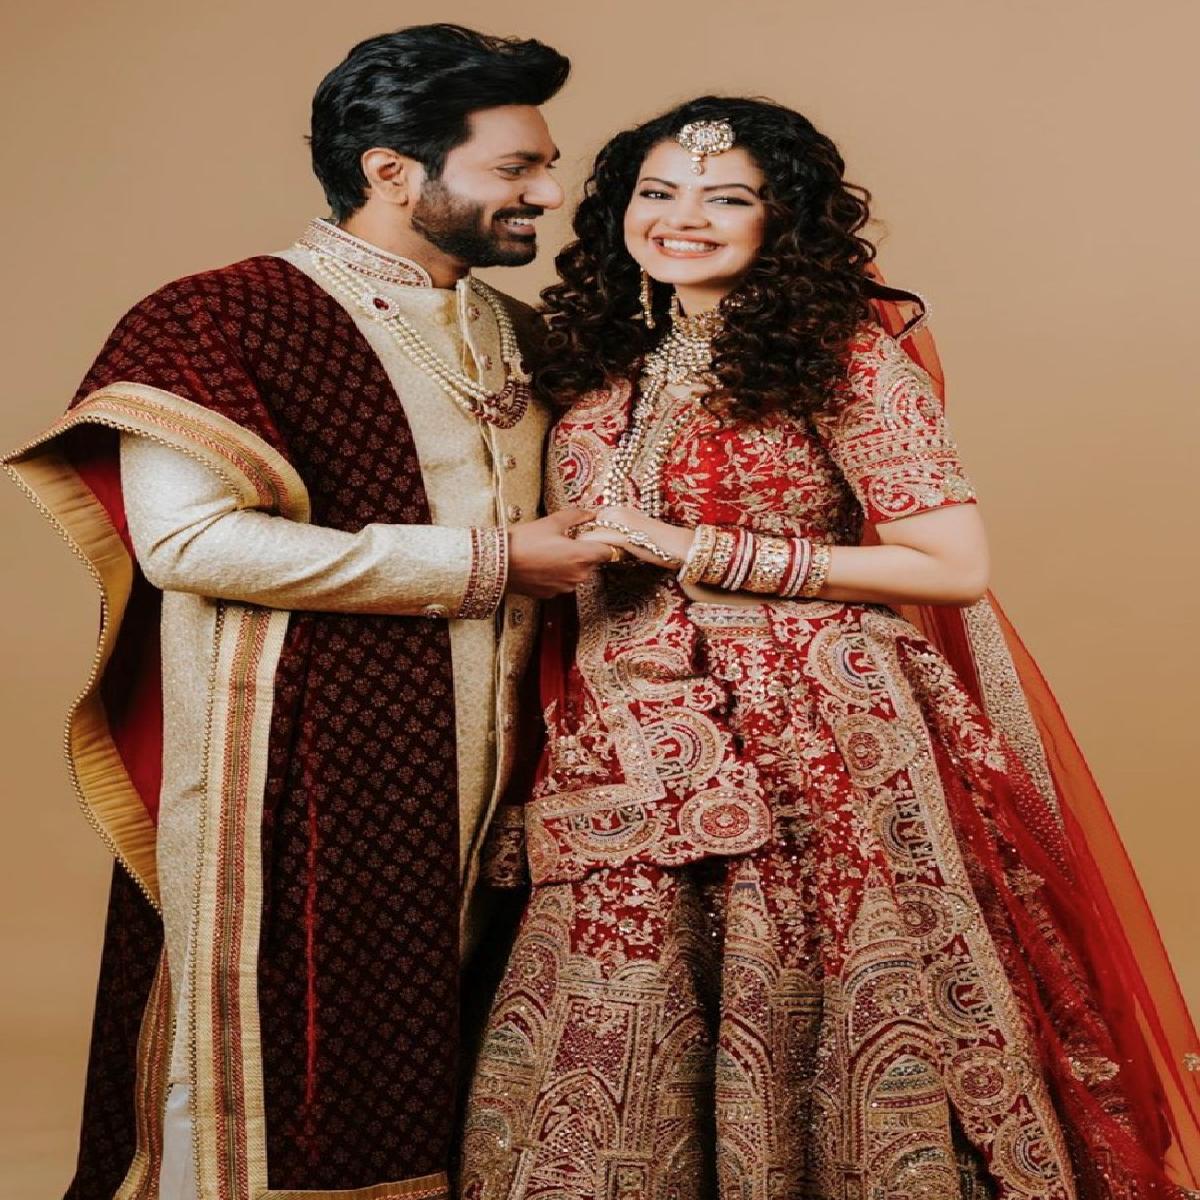 Palak Muchhal And Mithoon Sharma Are Hitched!!